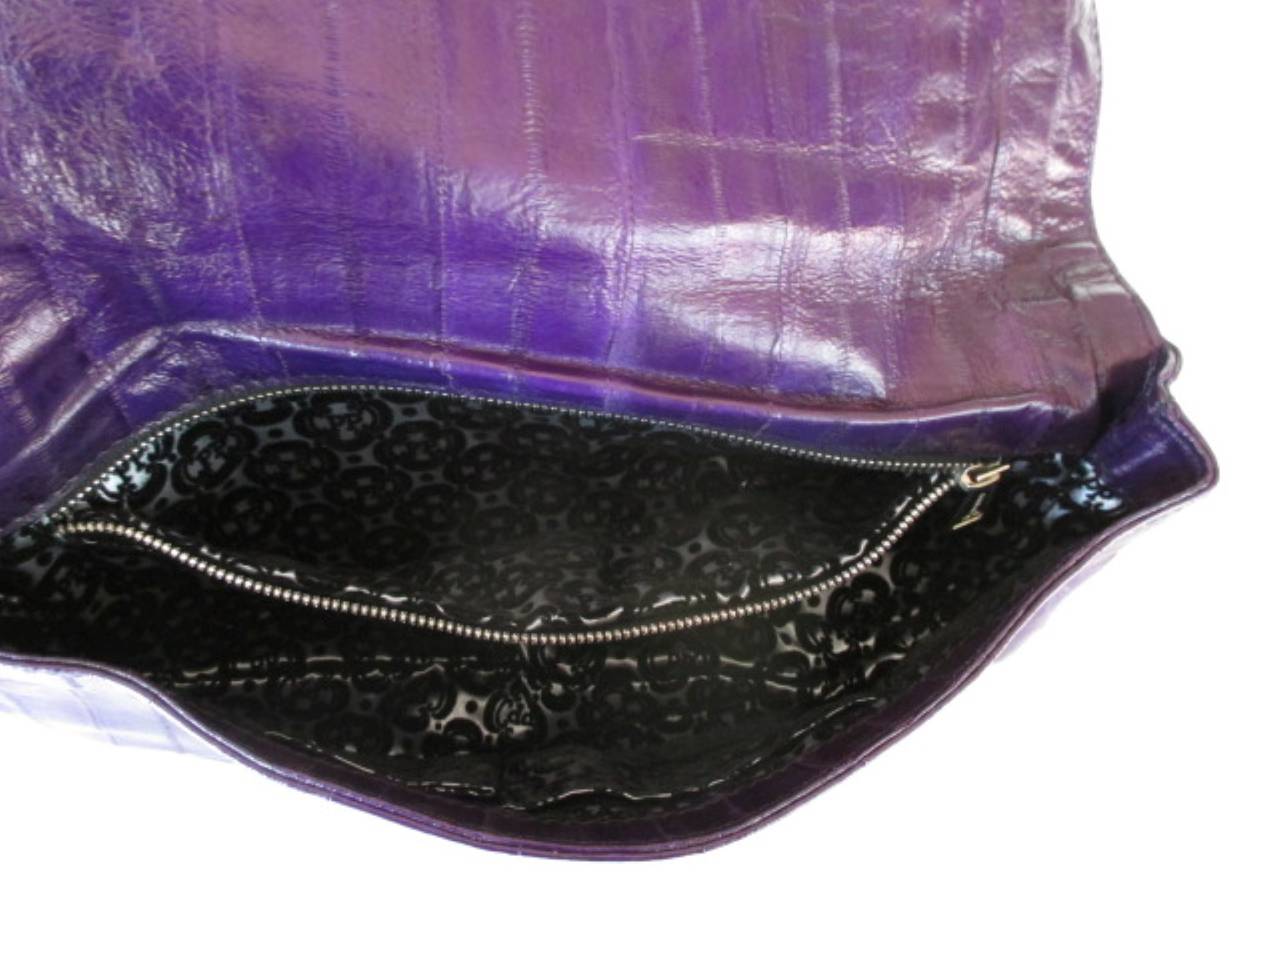 Phillip Plein is a German born designer who makes very exclusive fashion.
This special clutch is made from softes purple leather with a black  bounty hunter crocodile panel.
Inside there is a pocket with a zipper and 2 other pockets, the lining is